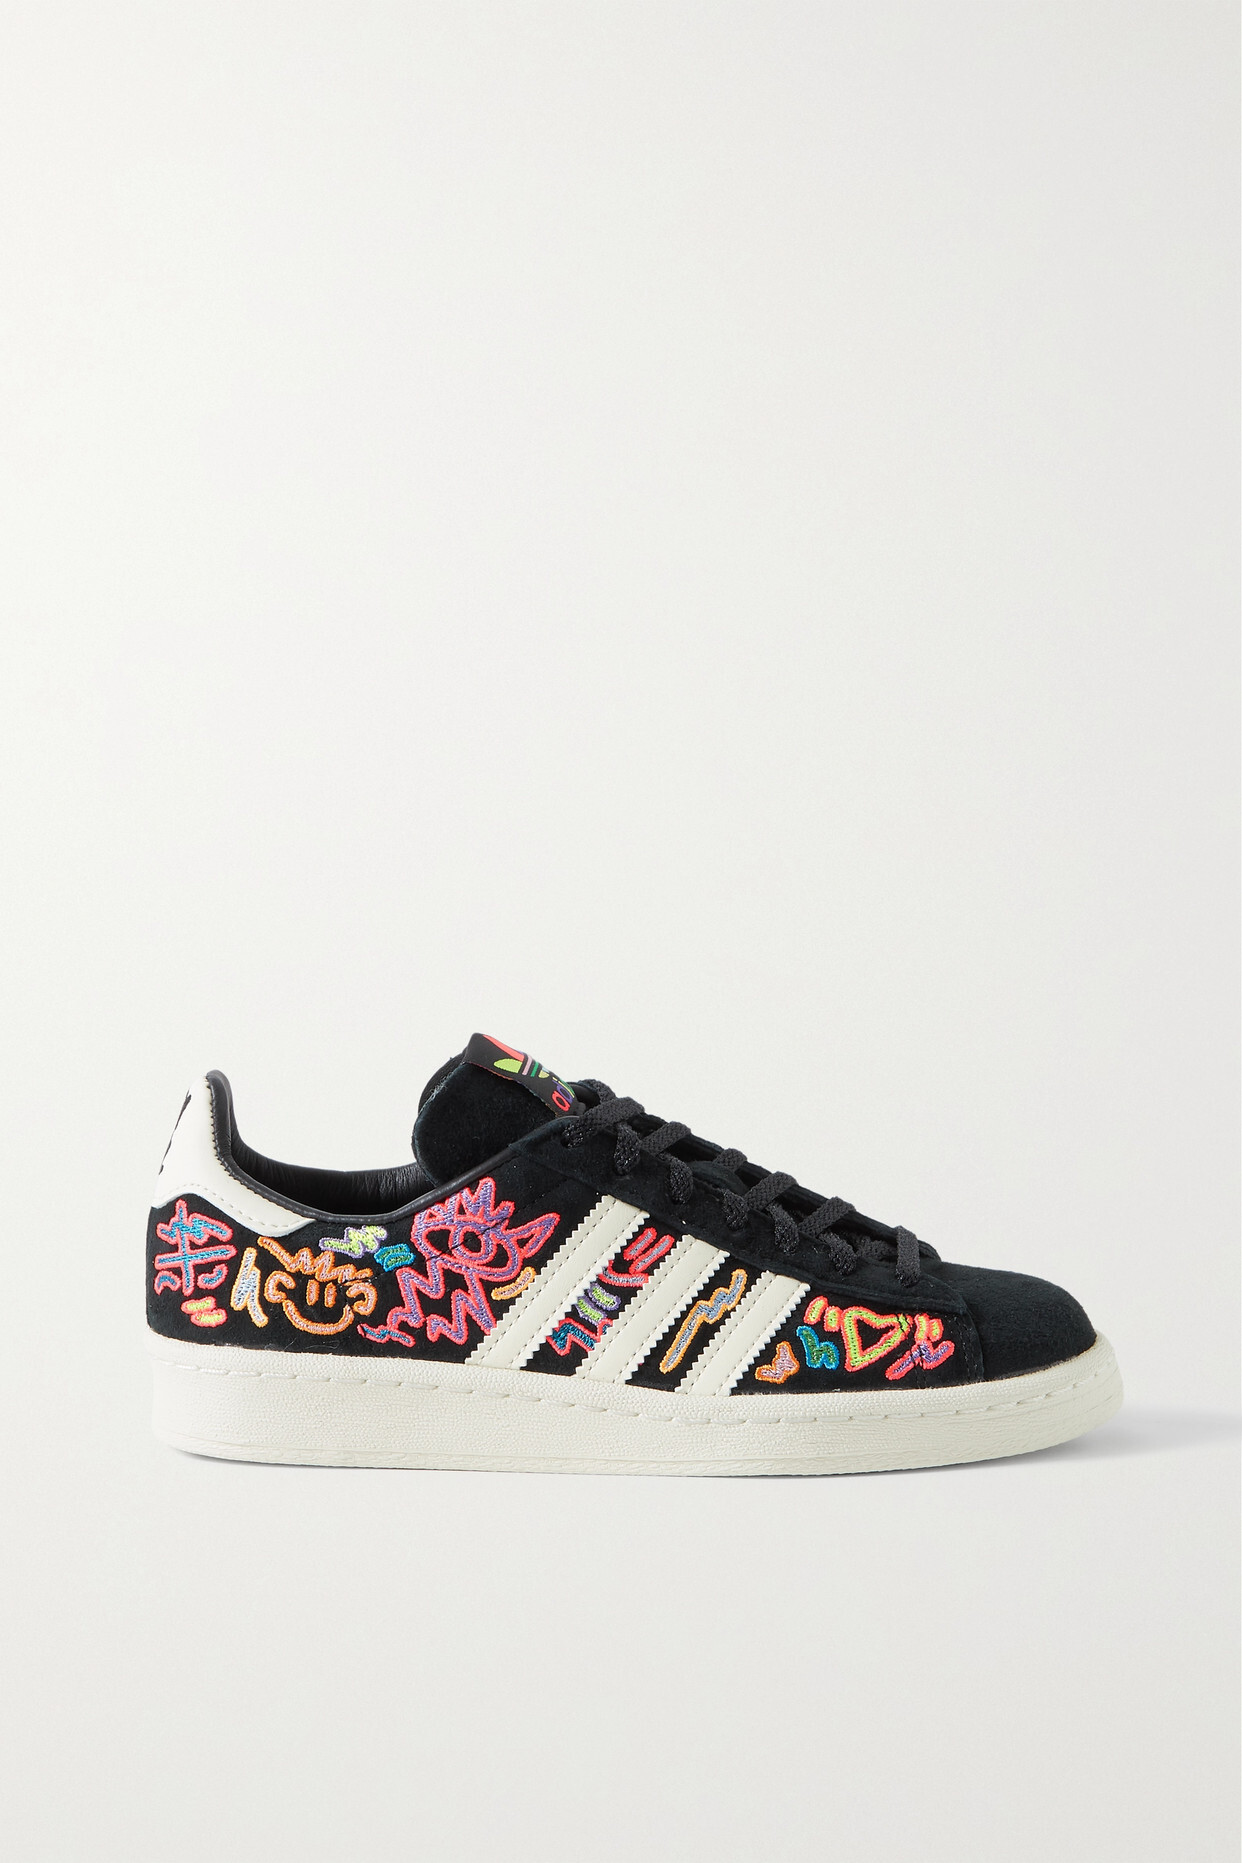 adidas Originals - Campus Leather-trimmed Embroidered Suede Sneakers - Black